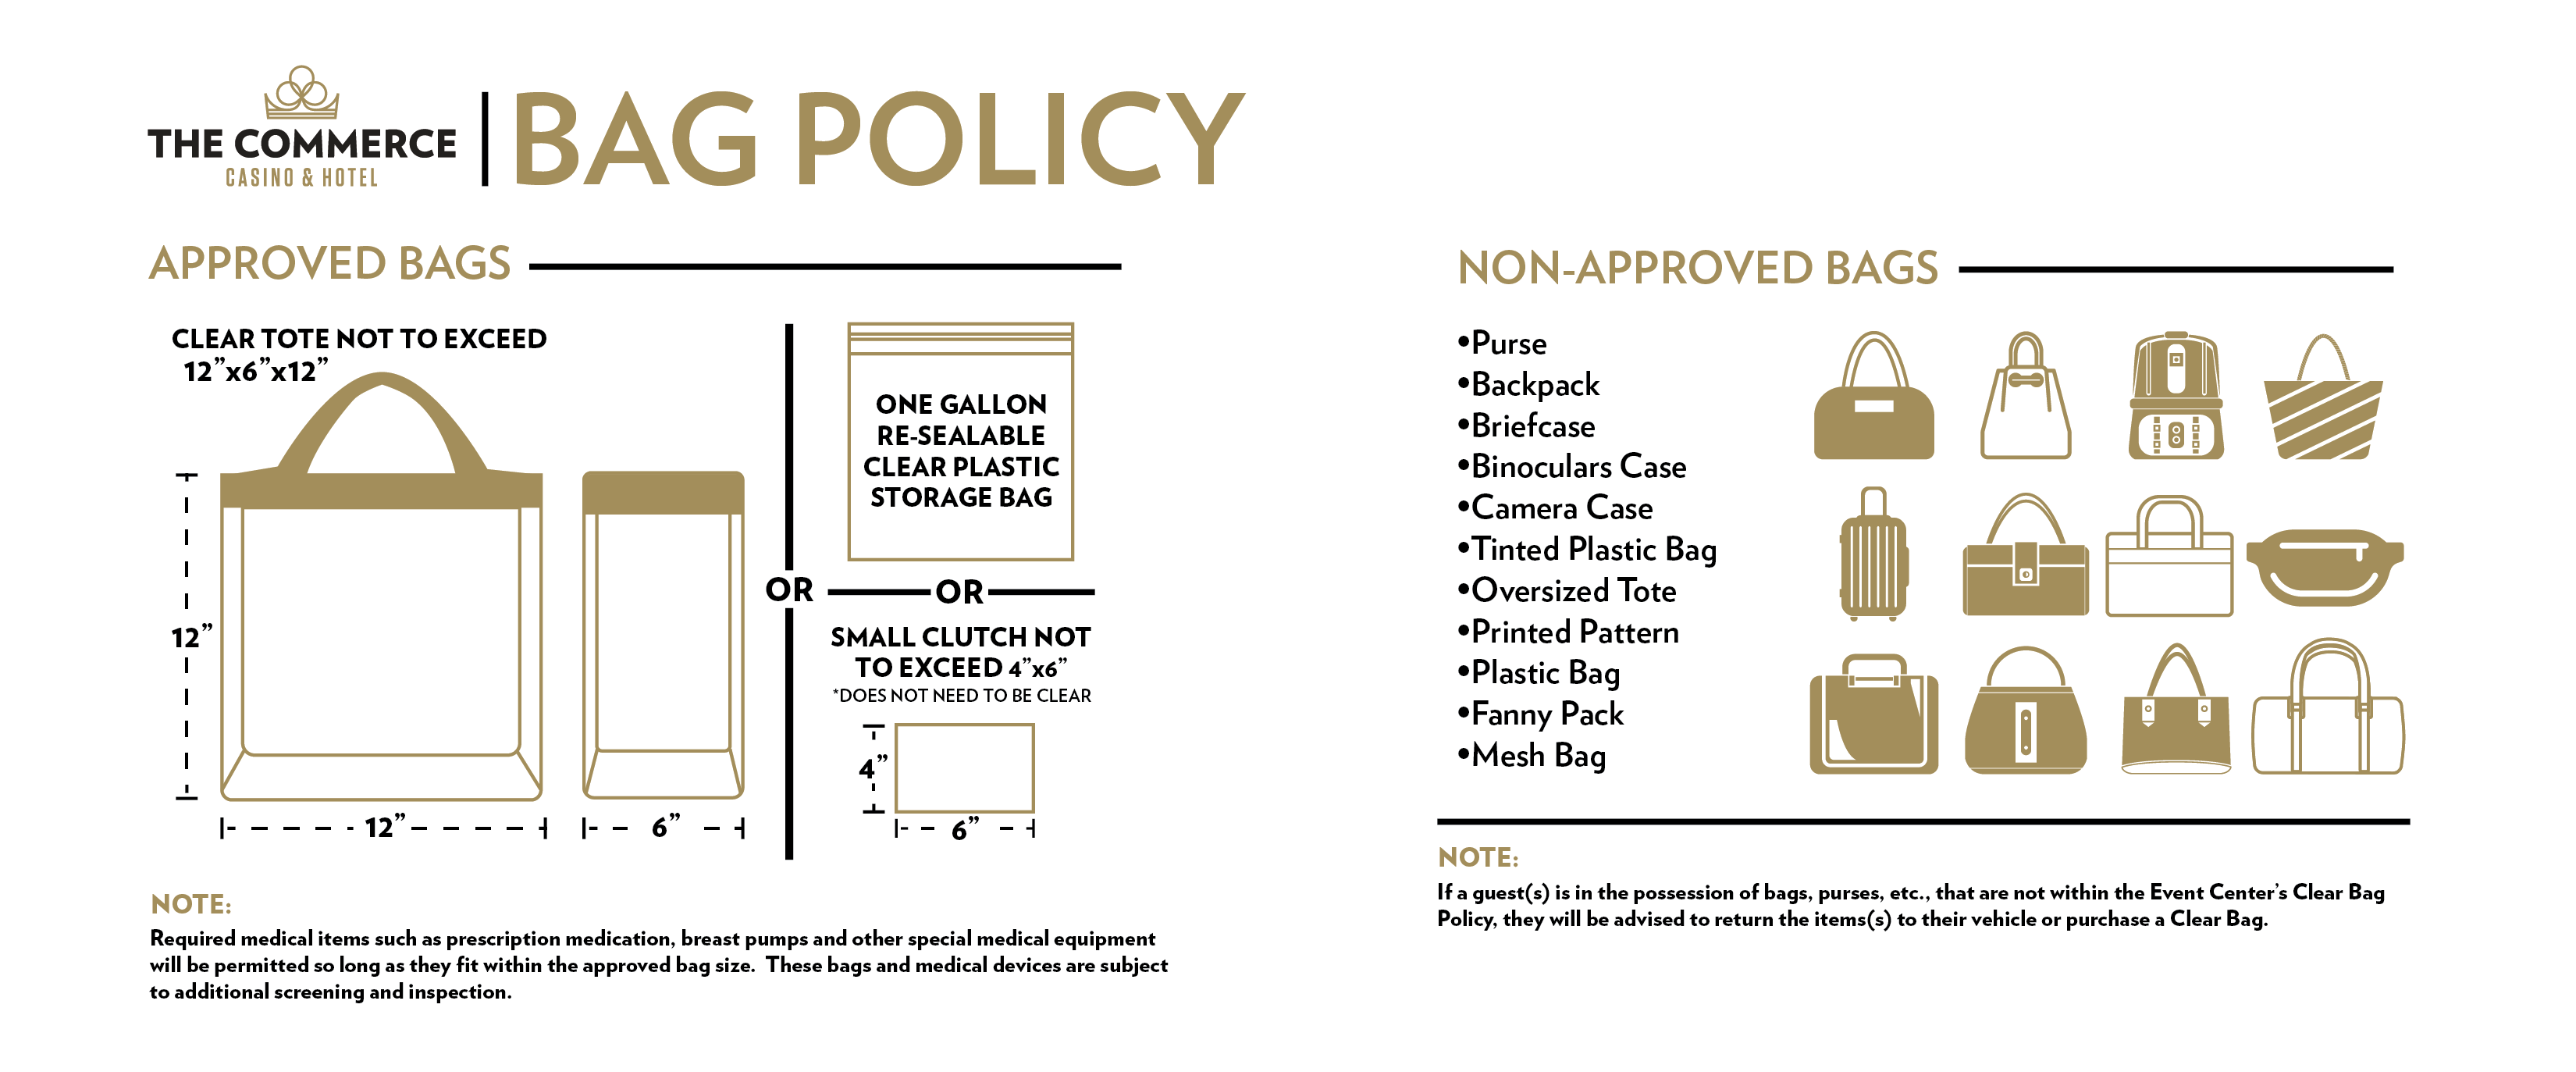 Graphic outlining a bag policy. Approved bags include a clear tote not exceeding 12"x6"x12" and a one-gallon resealable clear plastic storage bag. Non-approved bags include purses, backpacks, briefcases, camera cases, and patterned plastic totes.